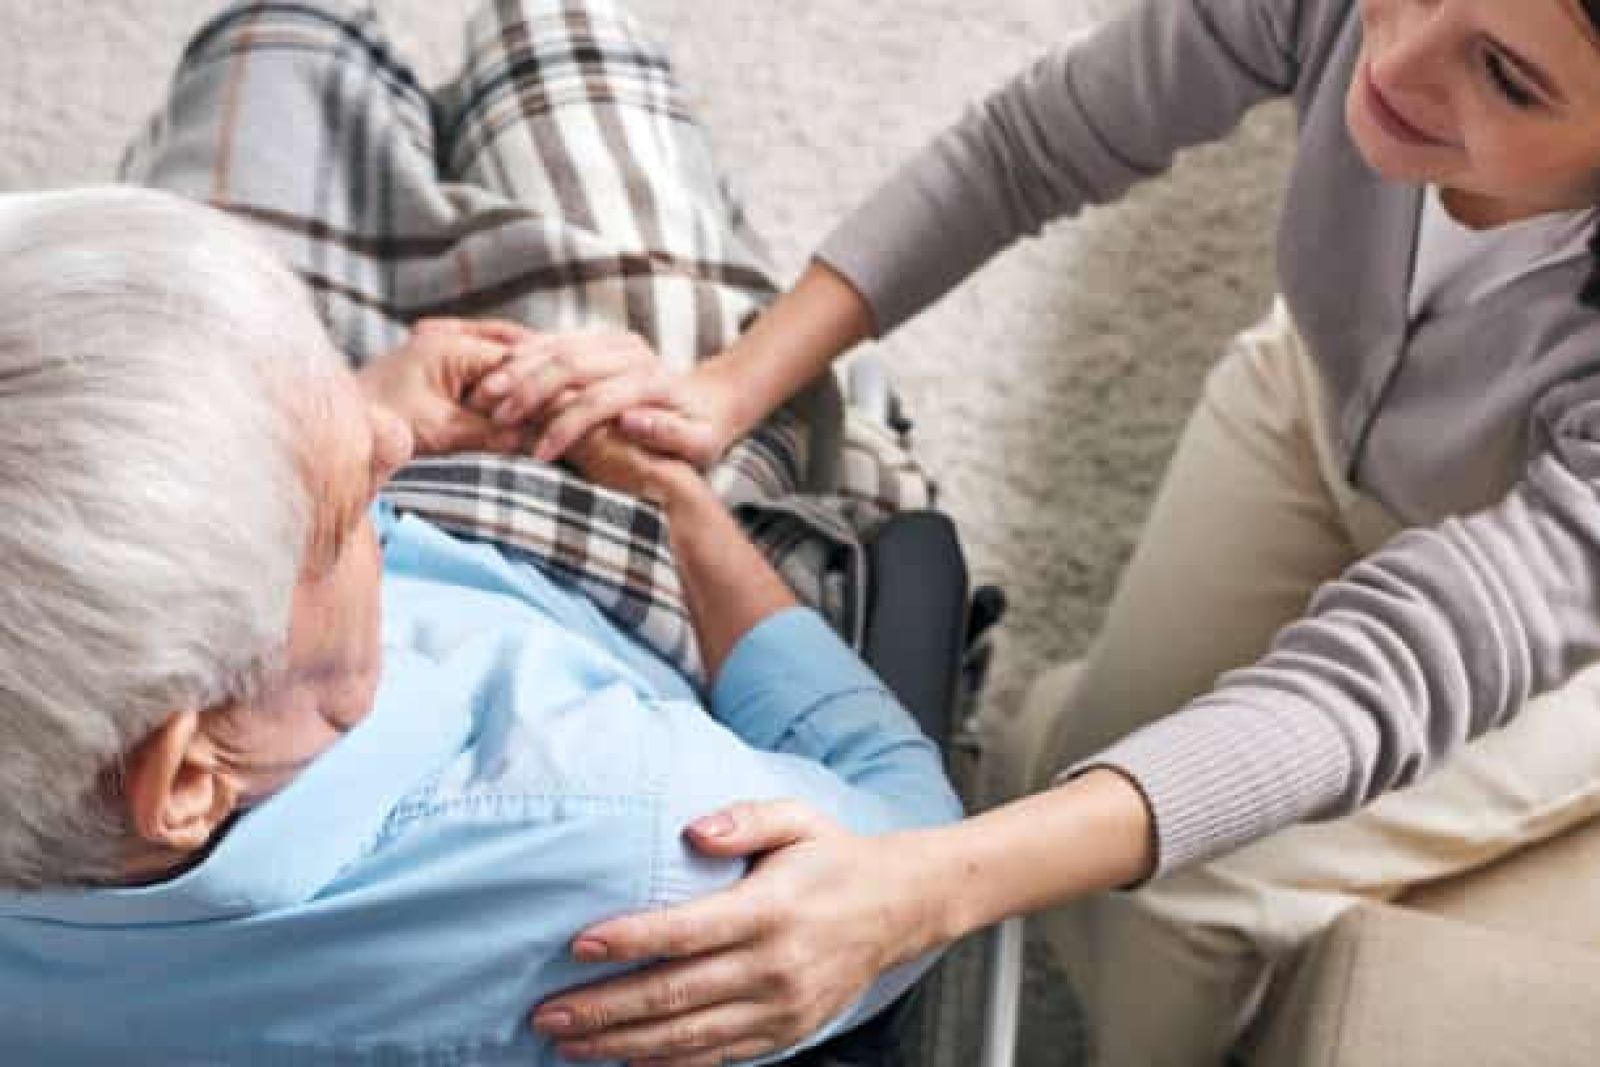 caregivers play a crucial role in enhancing the well-being of elderly individuals